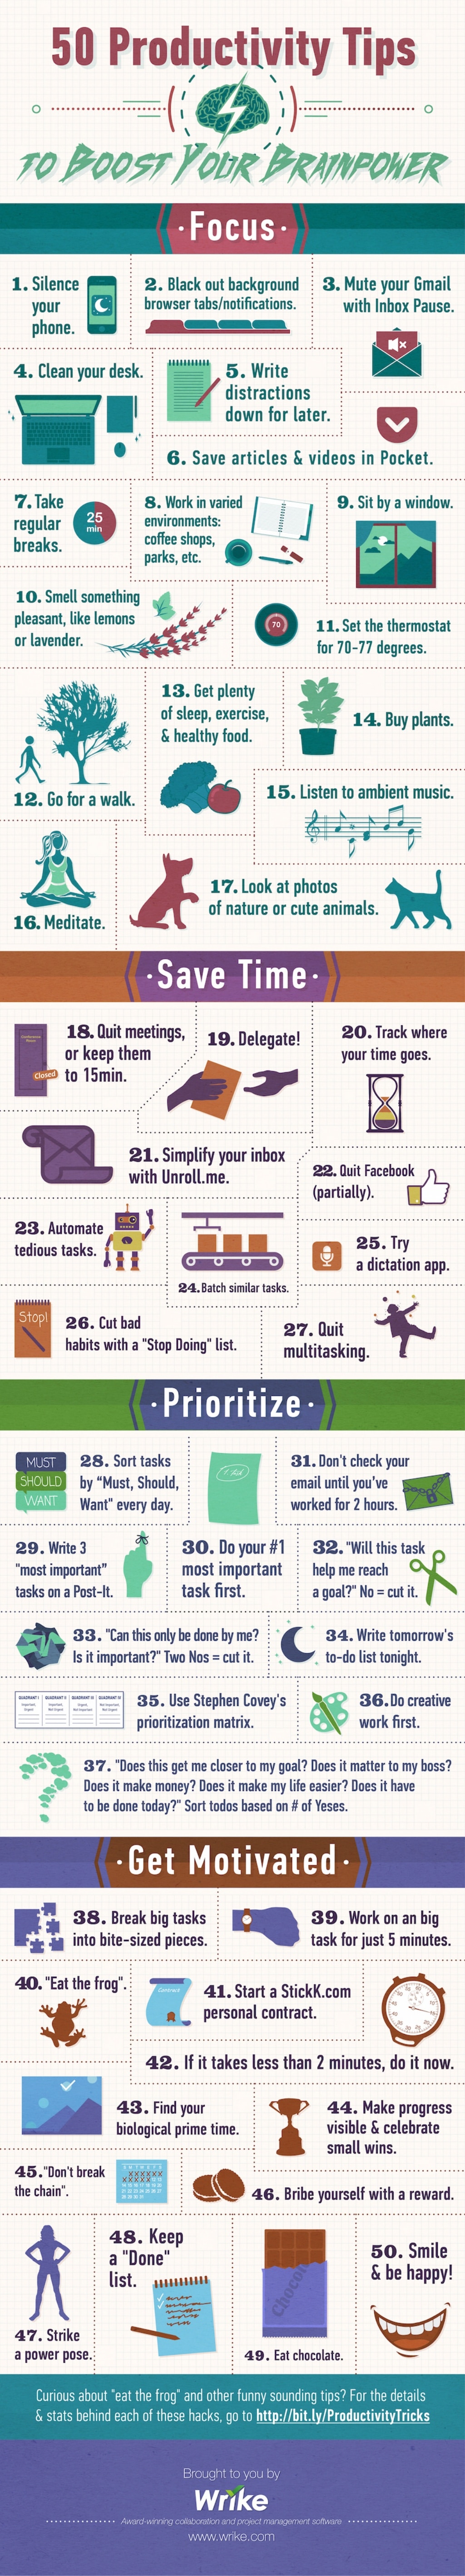 50 Productivity Tips To Boost Your Brainpower [Infographic]